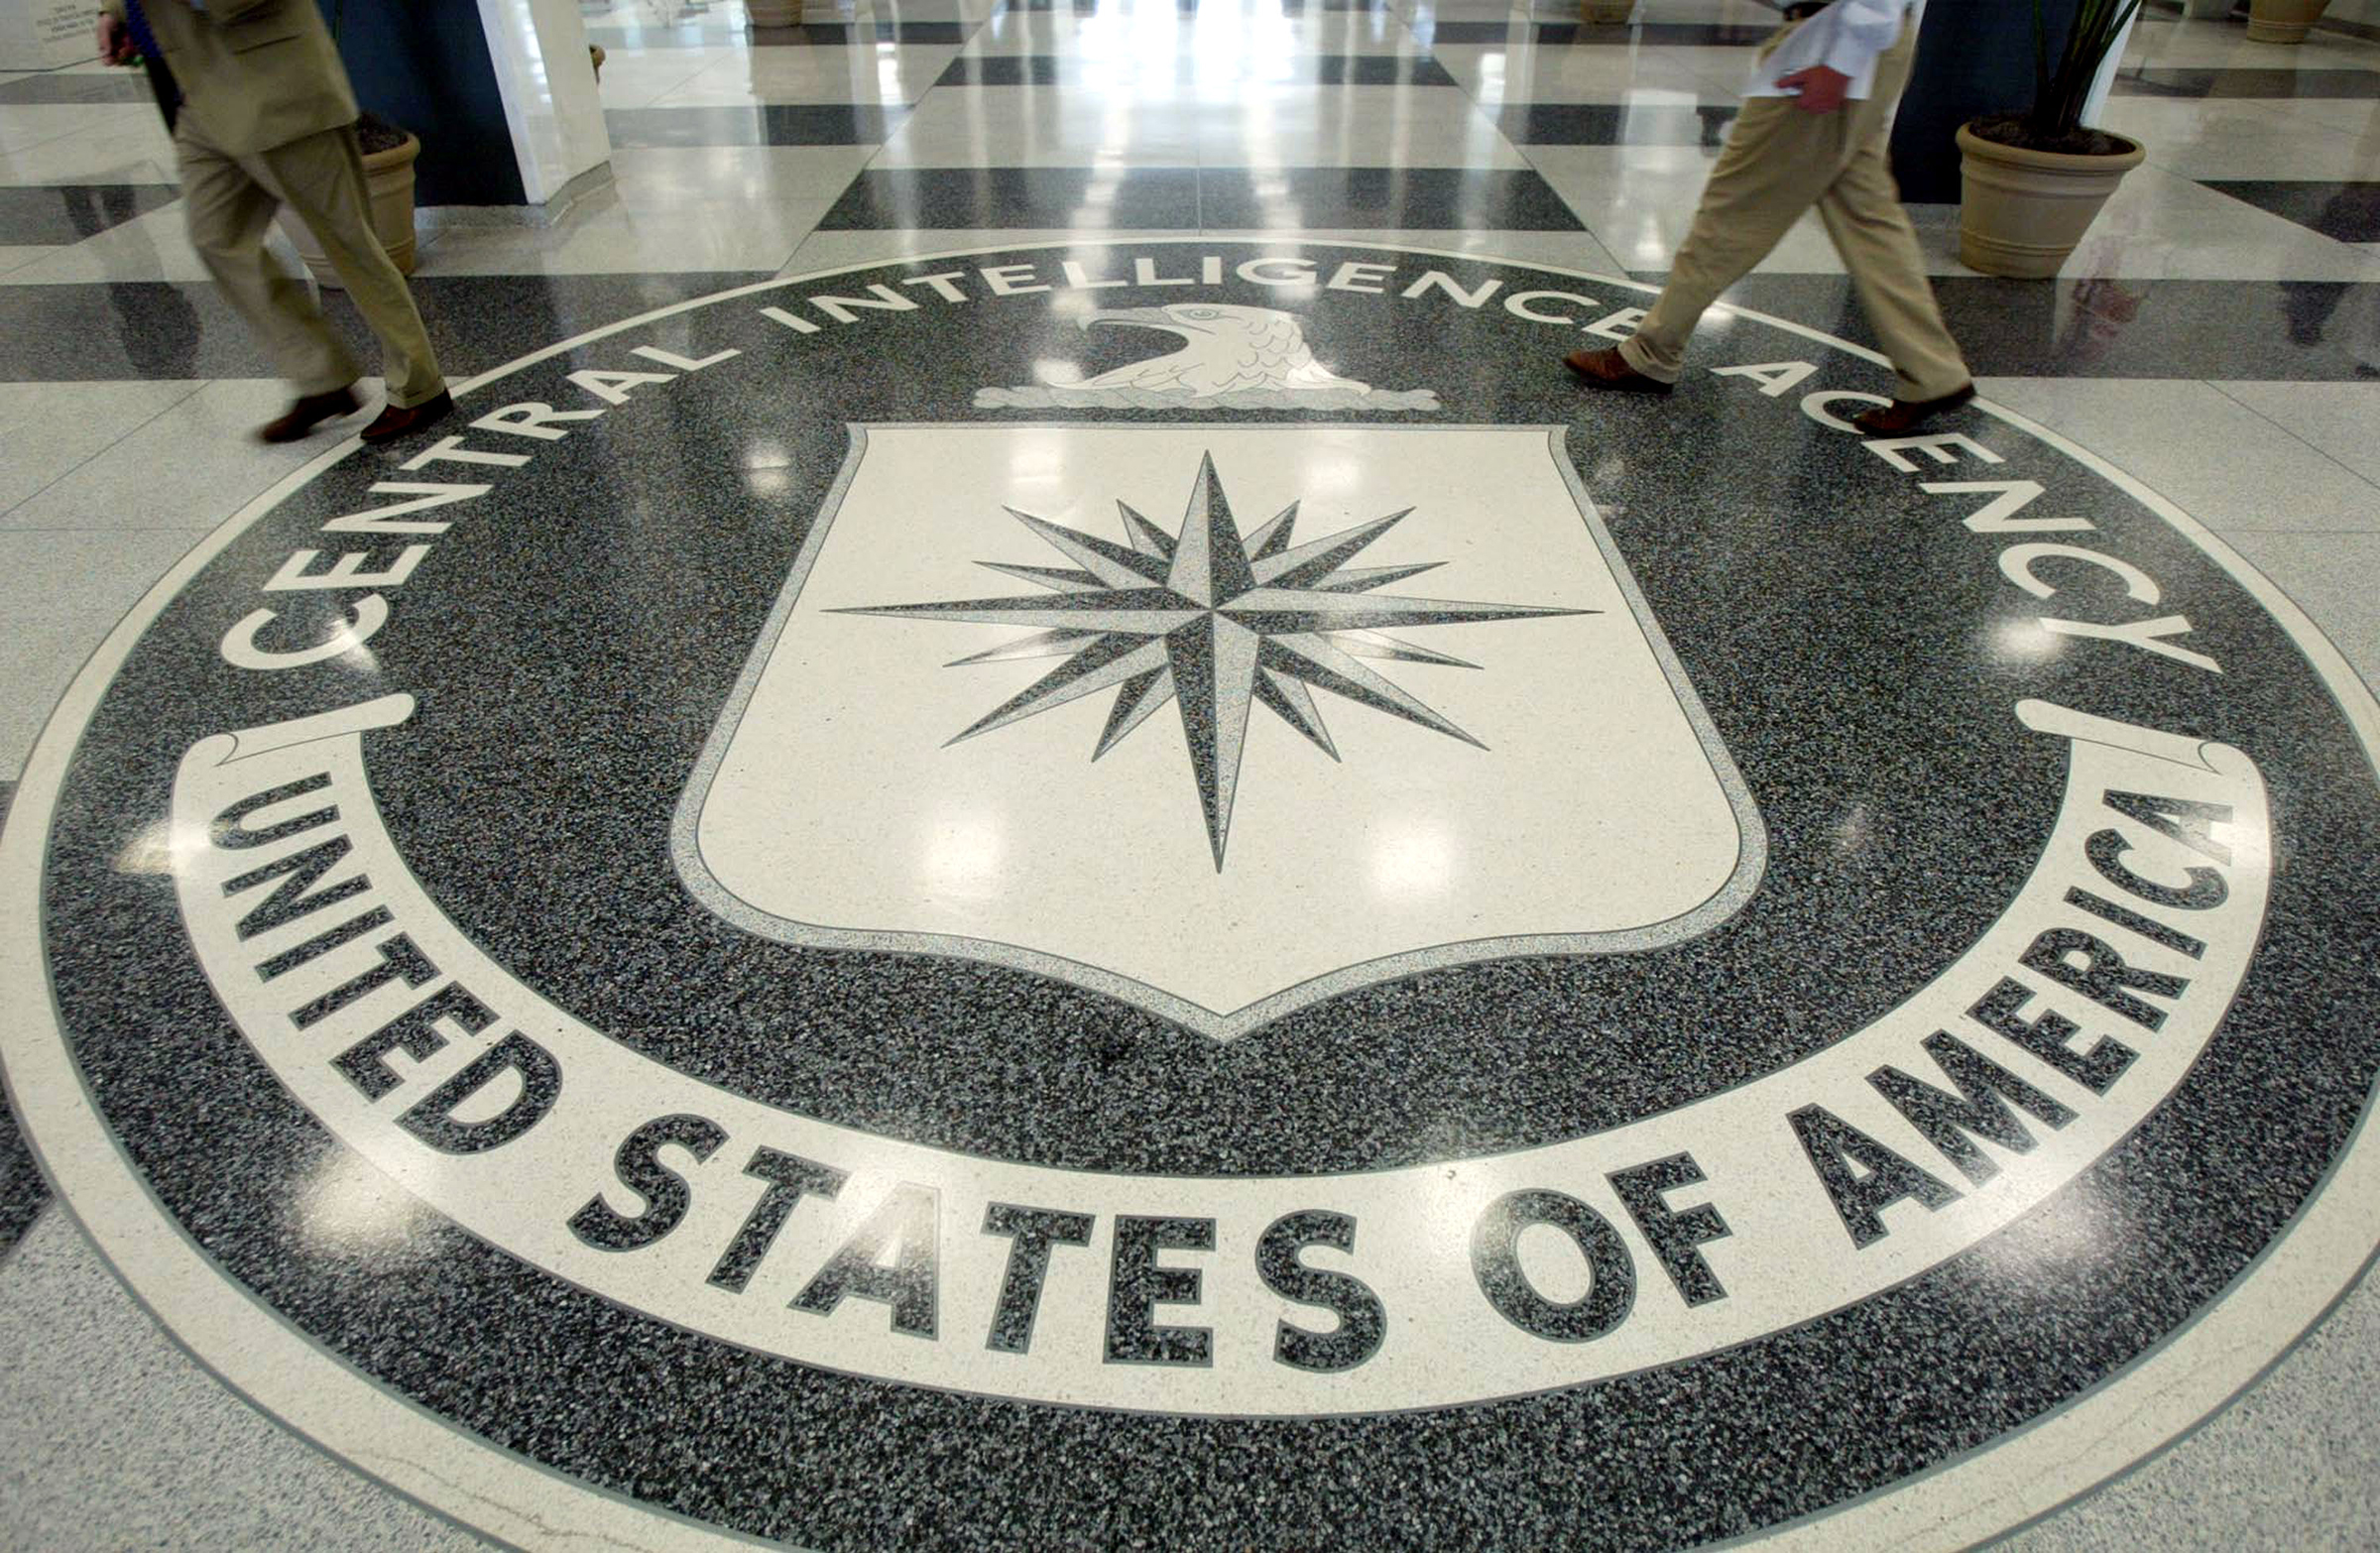 The CIA symbol is shown on the floor of CIA Headquarters in Langley, Virginia. (Mark Wilson—Getty Images)